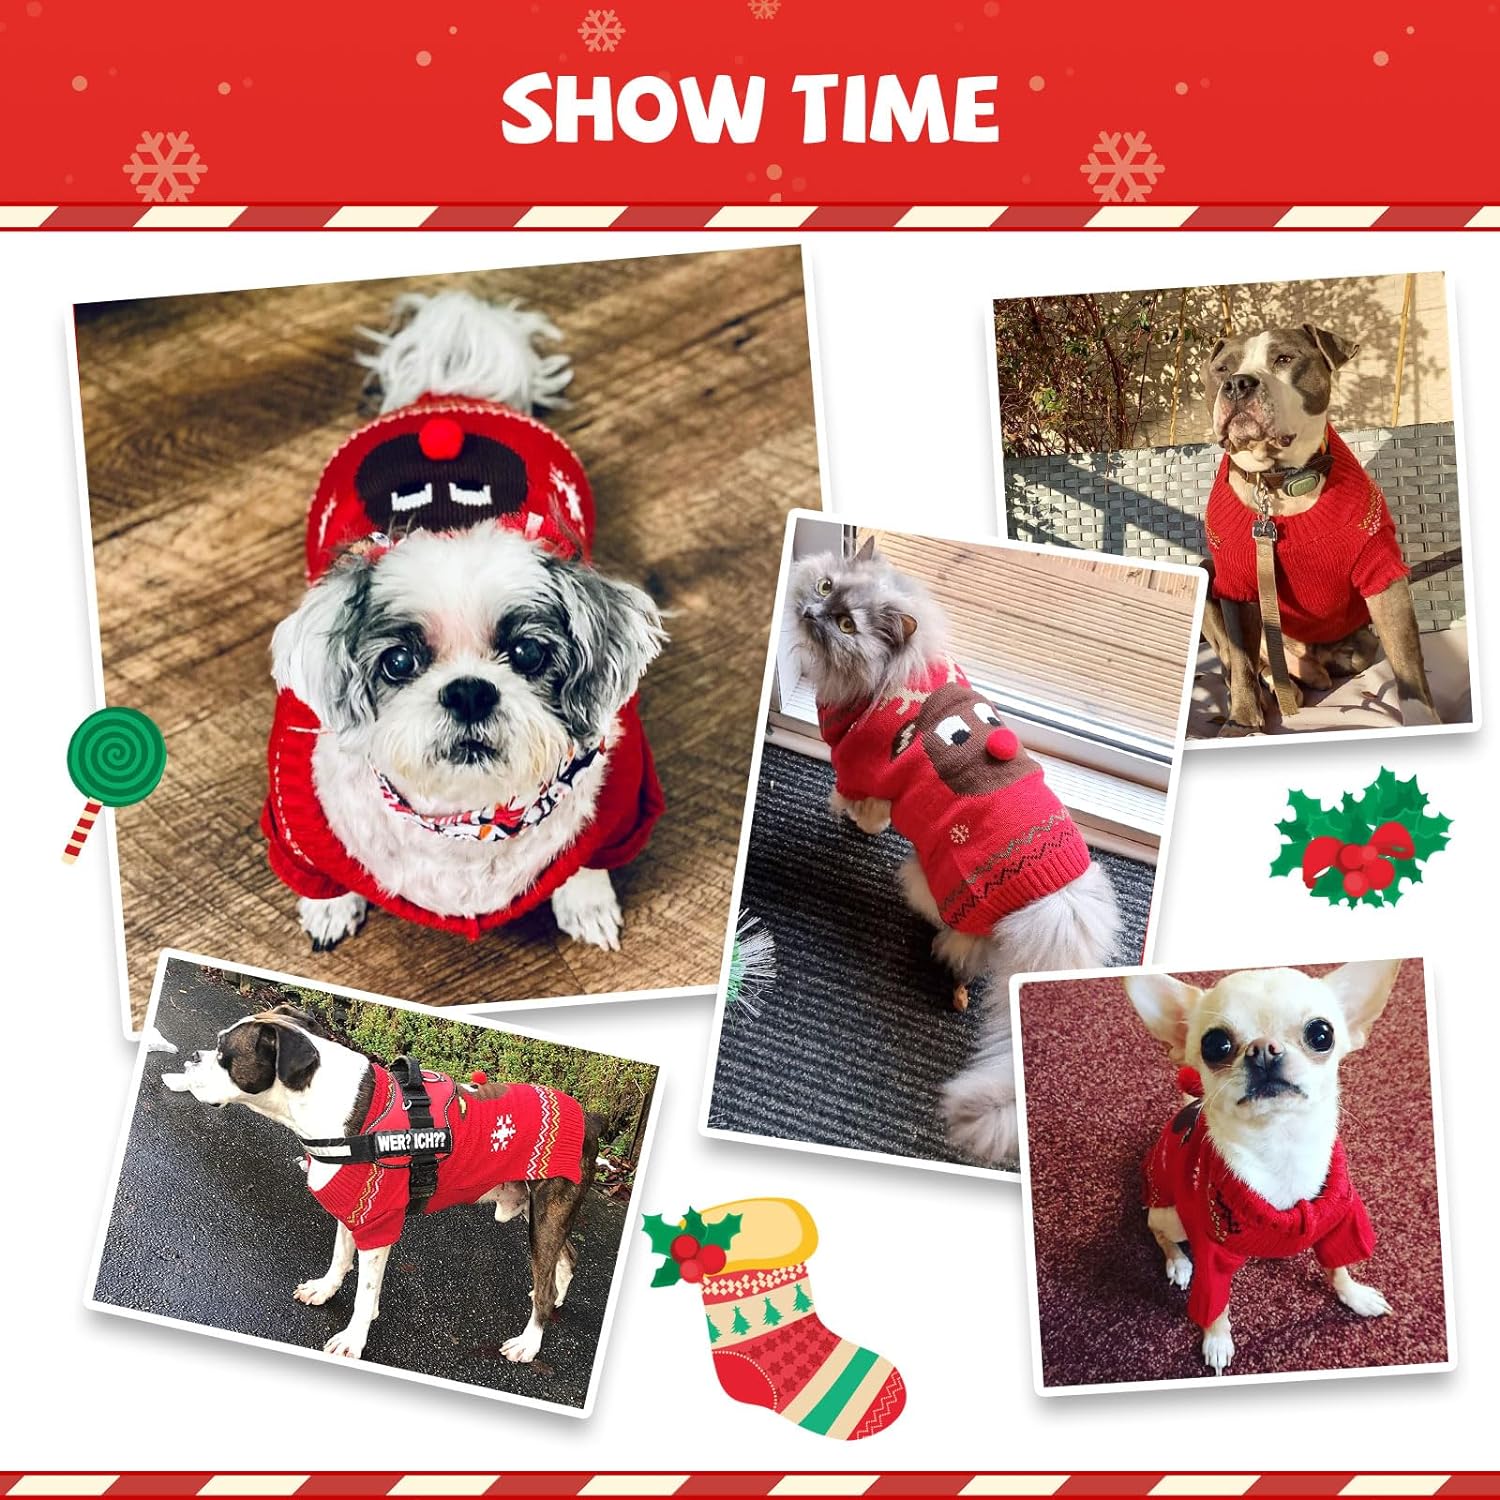 KUTKUT Dog Christmas Sweater Cute Red Reindeer Dog Knitted Pullover for Small Medium Large Dogs Cats Warm Xmas Pet Outfit Puppy Knit Jumper New Year Fall Winter Holiday Dog Clothes - kutkutst